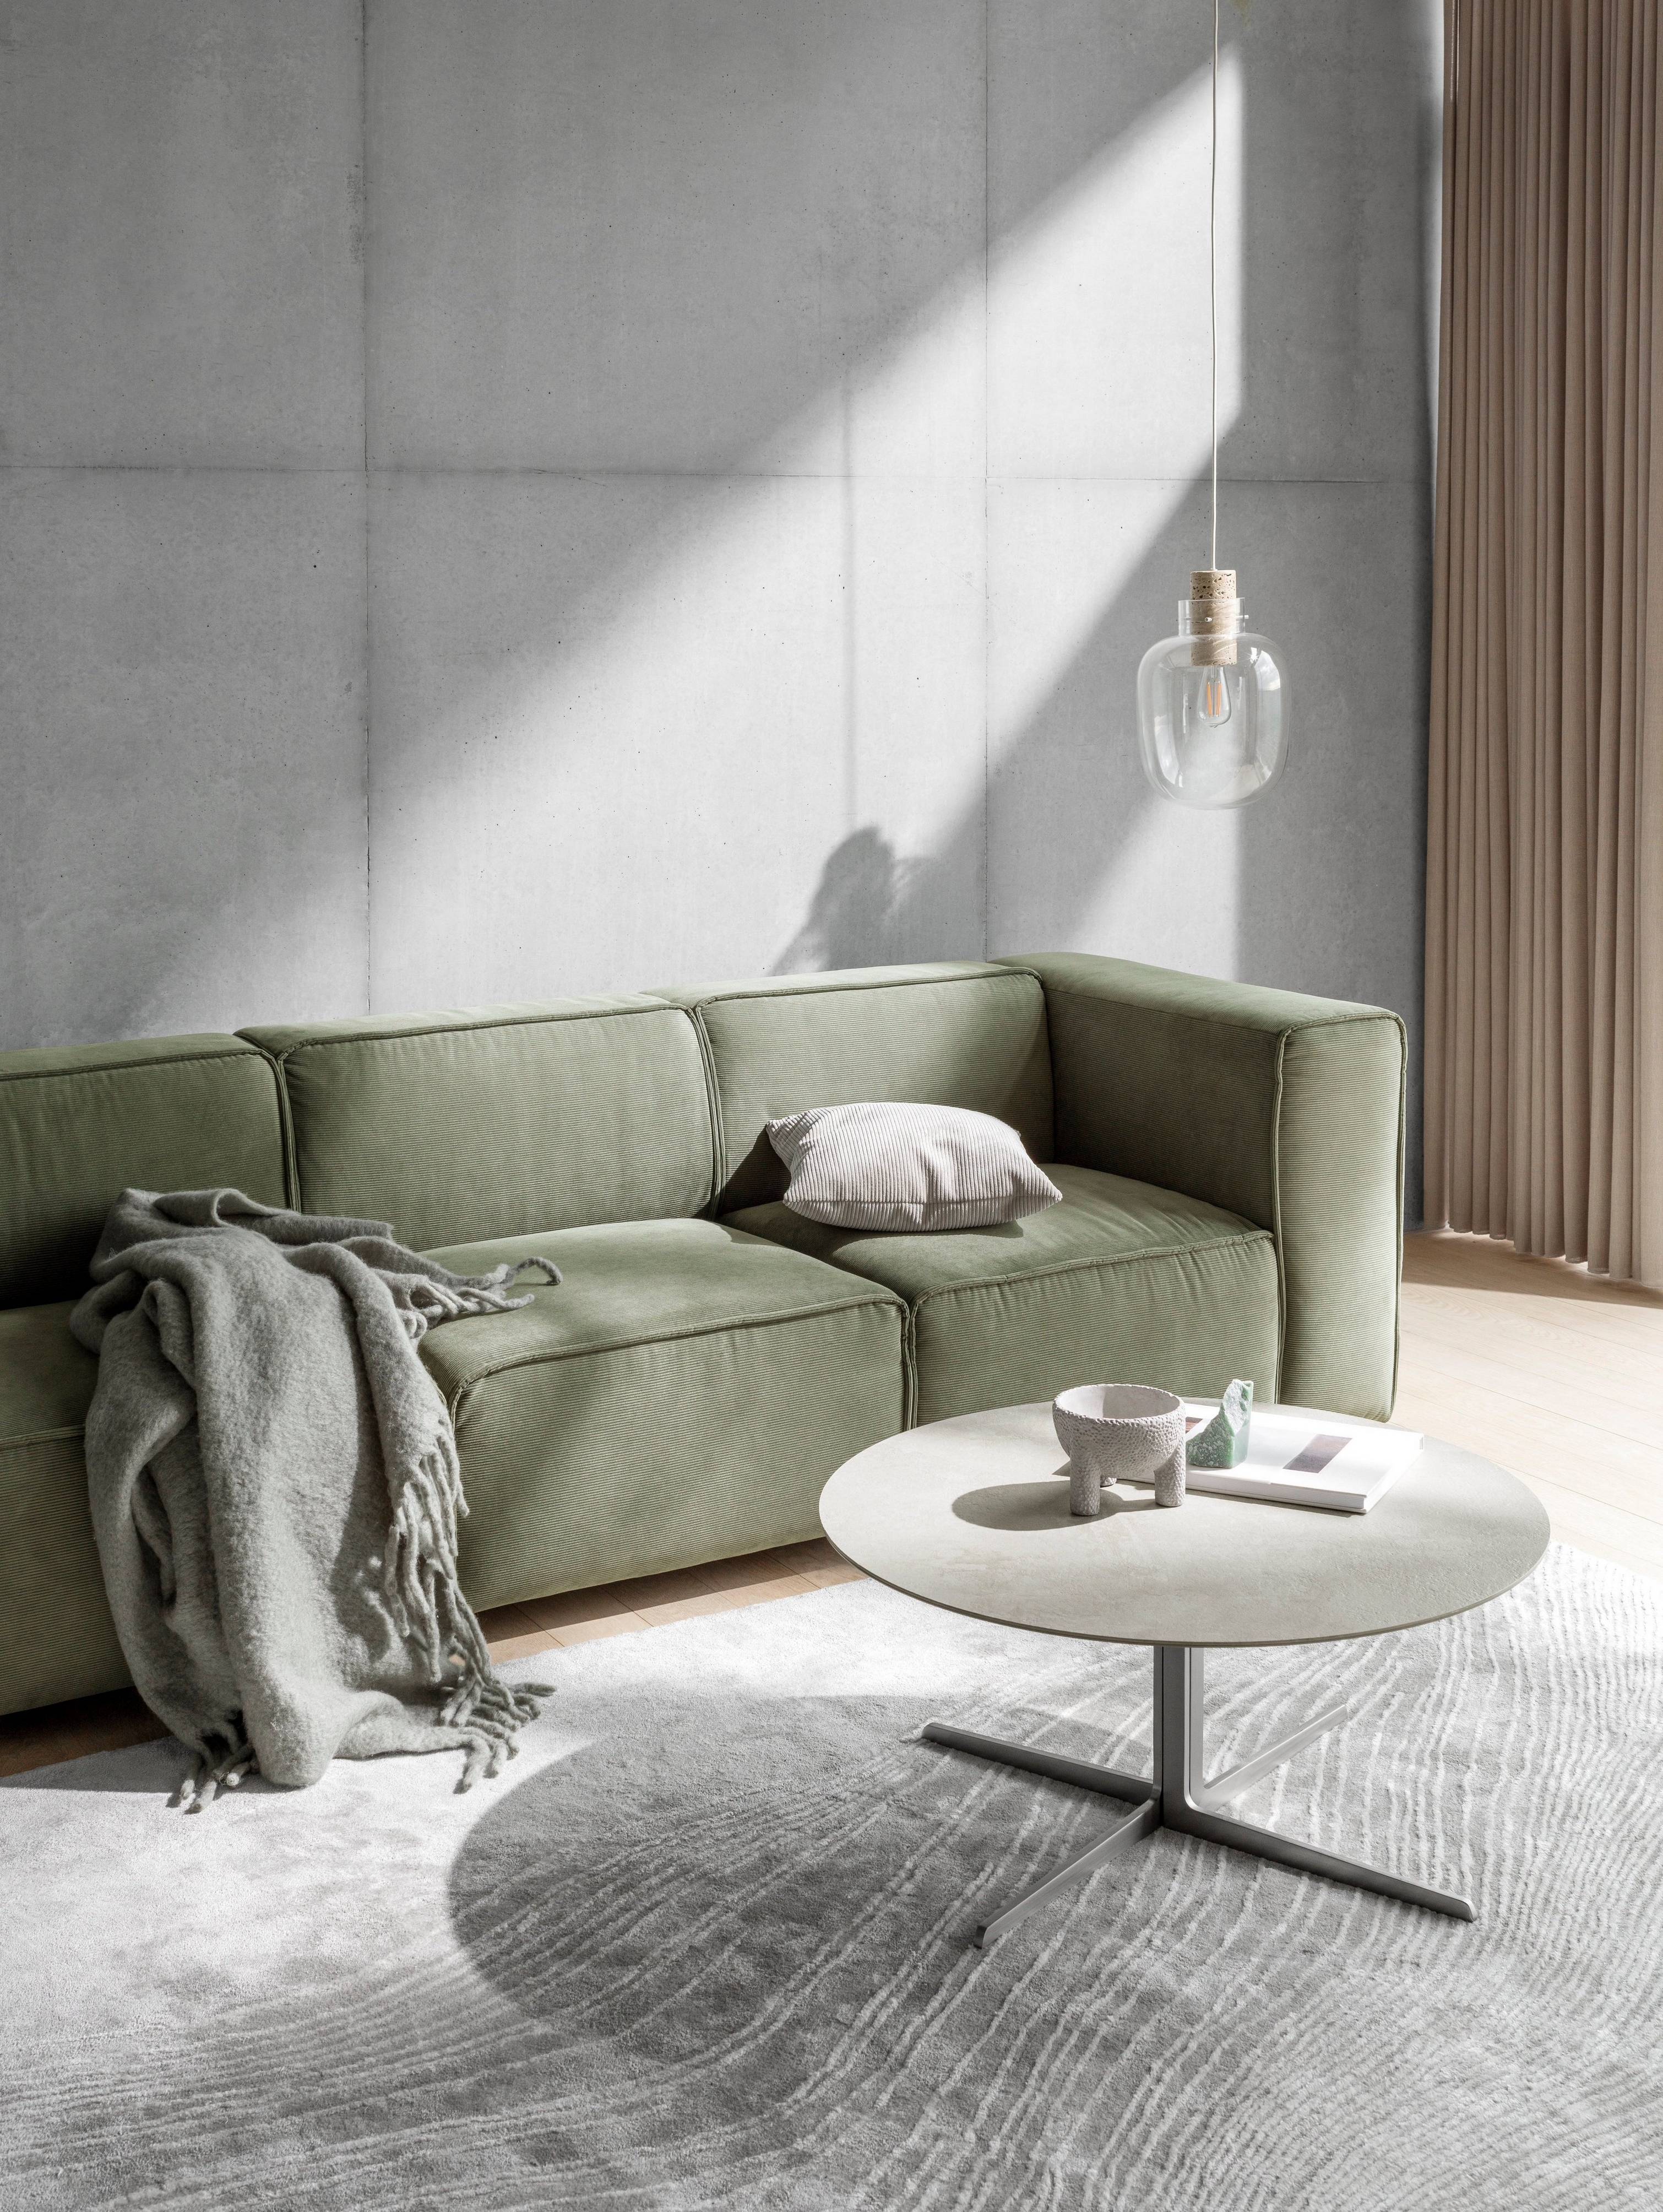 The Carmo sofa in a nicly sunlit room with a pillow and a rug placed on the seats.